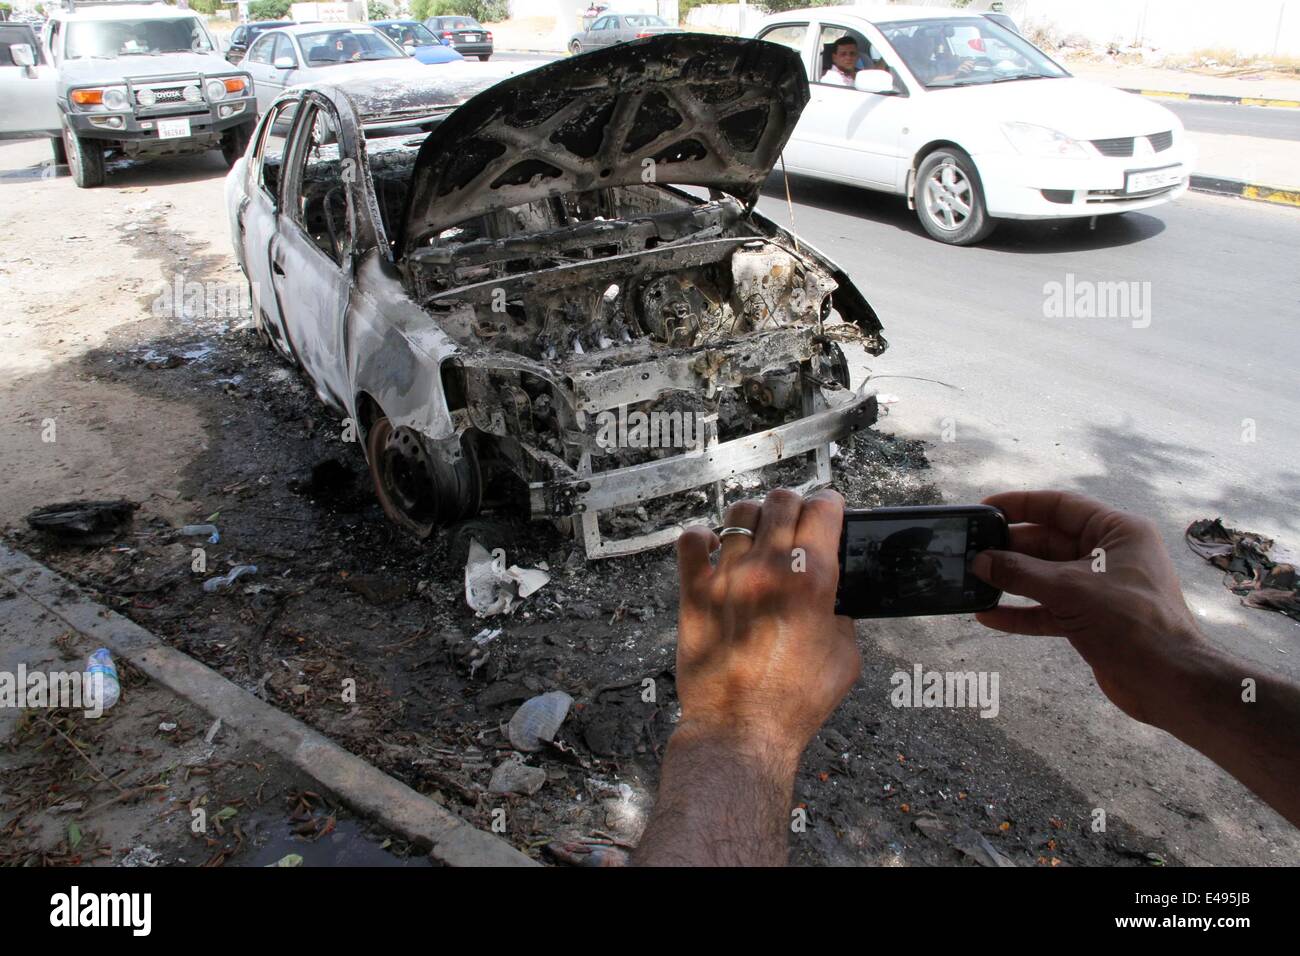 Tripoli, Libya. 6th July, 2014. A citizen takes a picture of a damaged car in Janzour area of Tripoli, Libya, on July 6, 2014. Heavy fighting erupted in the Libyan capital city of Tripoli since the early hours of Sunday between the Interior Ministry's auxiliary security forces and a militia group called 'Knights Battalion', killing one person and injuring three others. (Xinhua/Hamza Turkia) Stock Photo